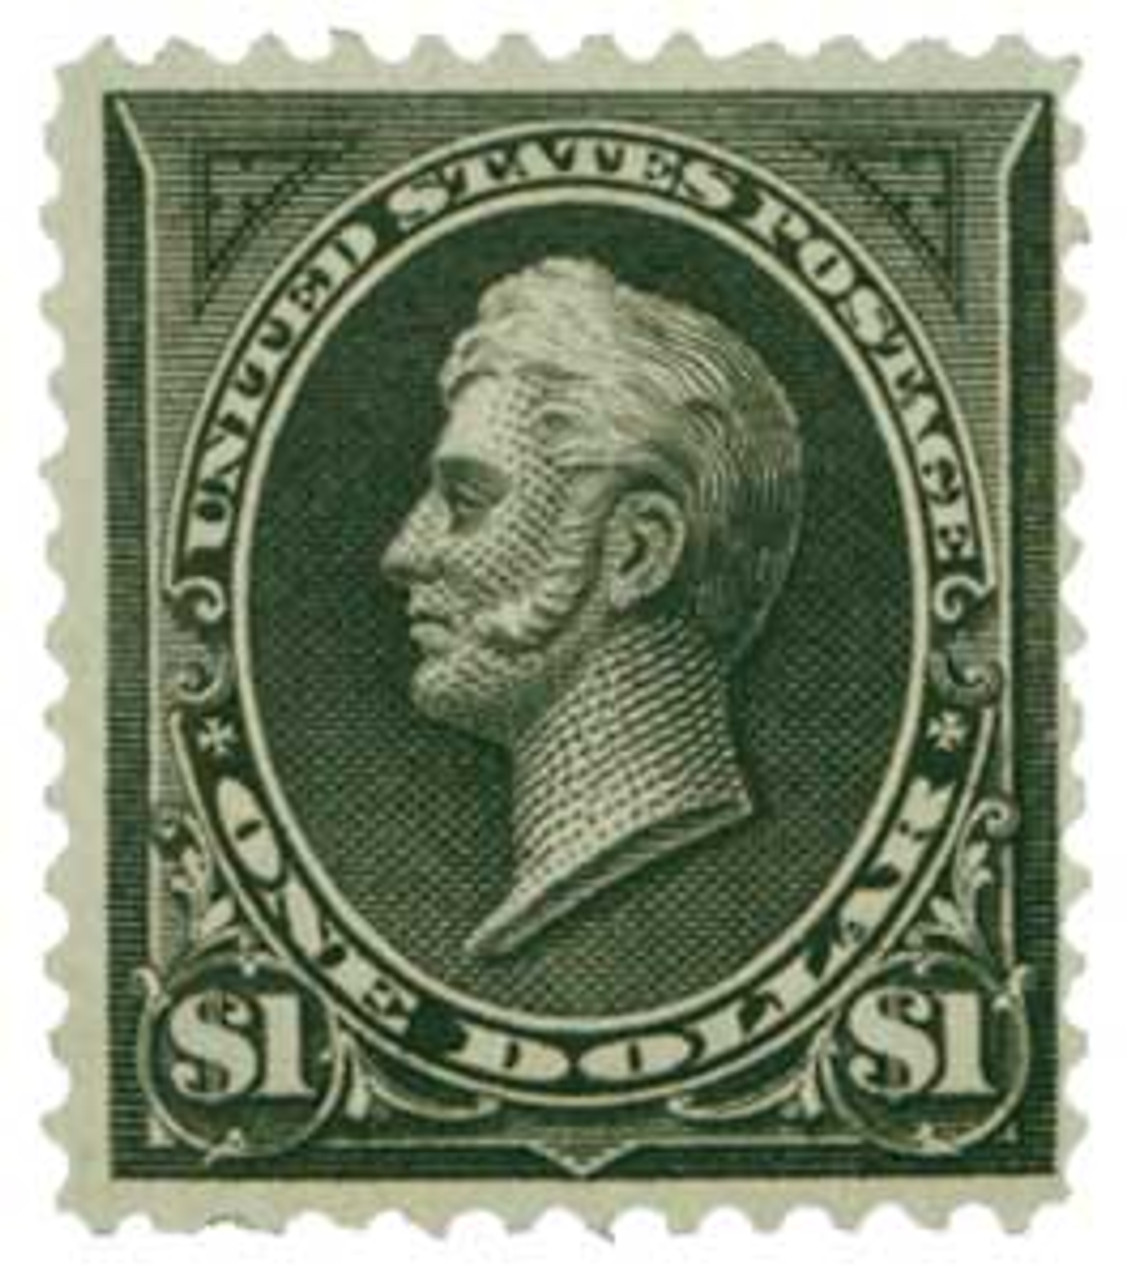 261A - 1894 $1 Perry, unwatermarked, type II - Mystic Stamp Company